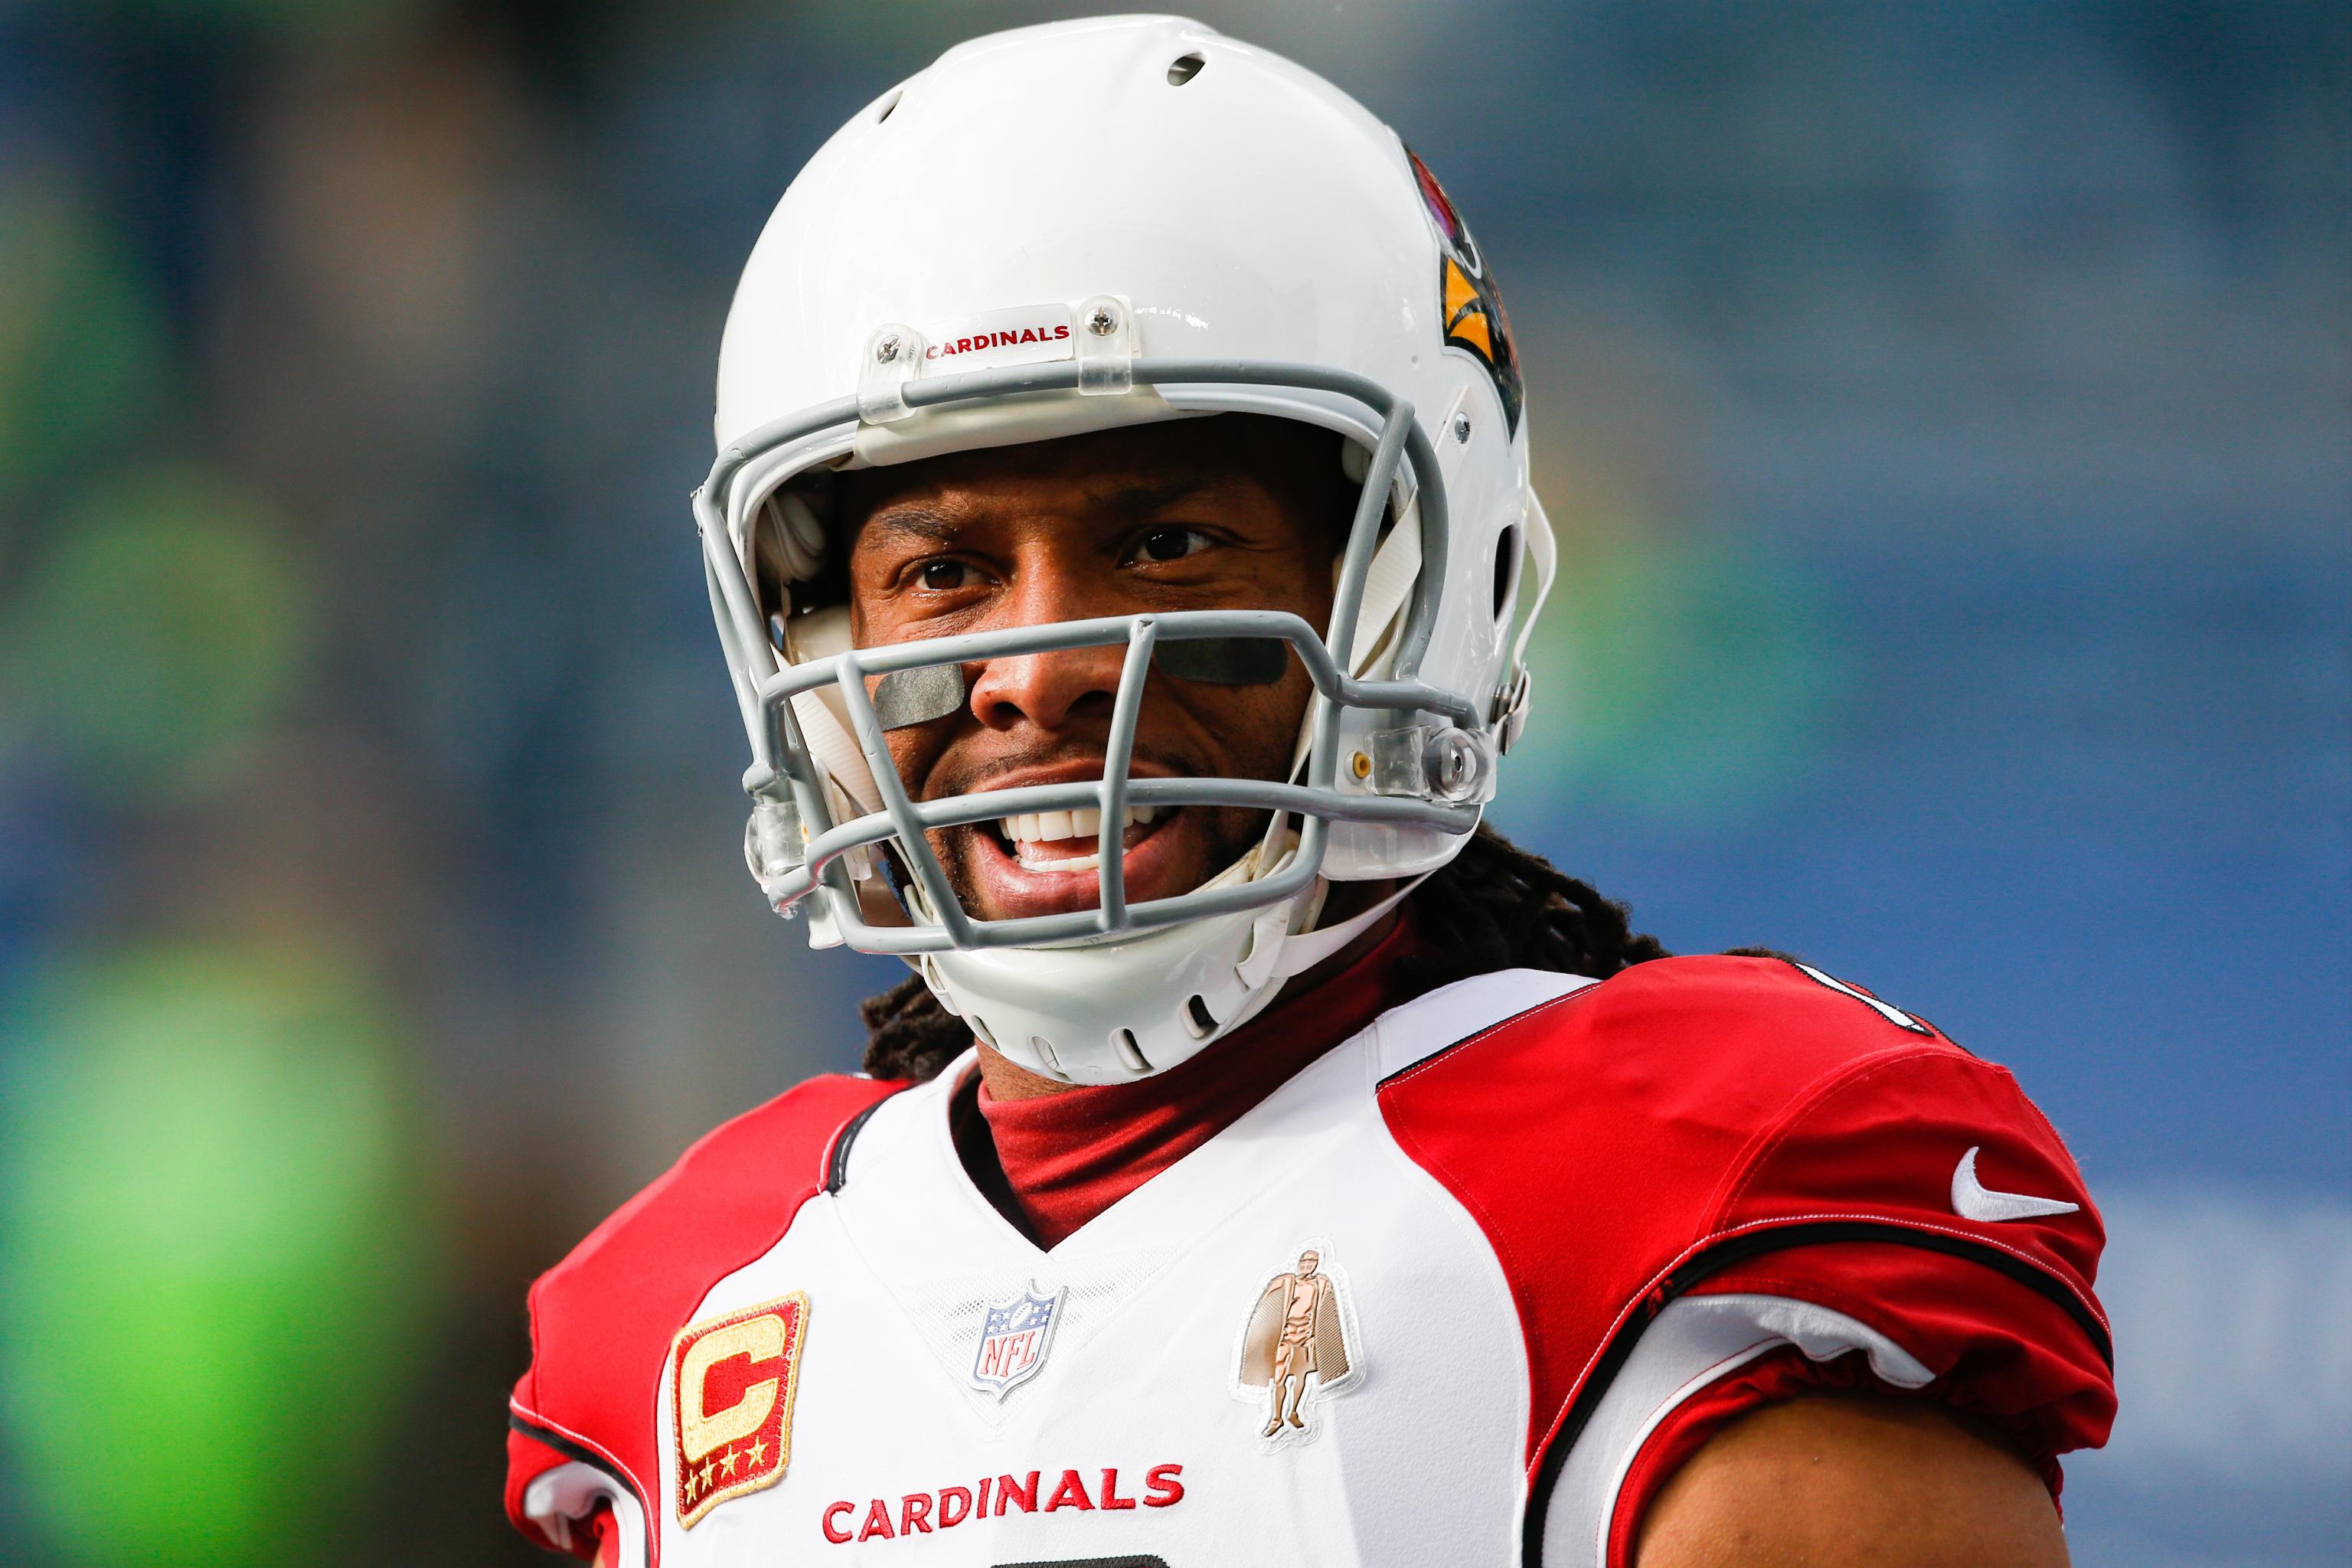 Larry Fitzgerald taking time for decision to play in 2019